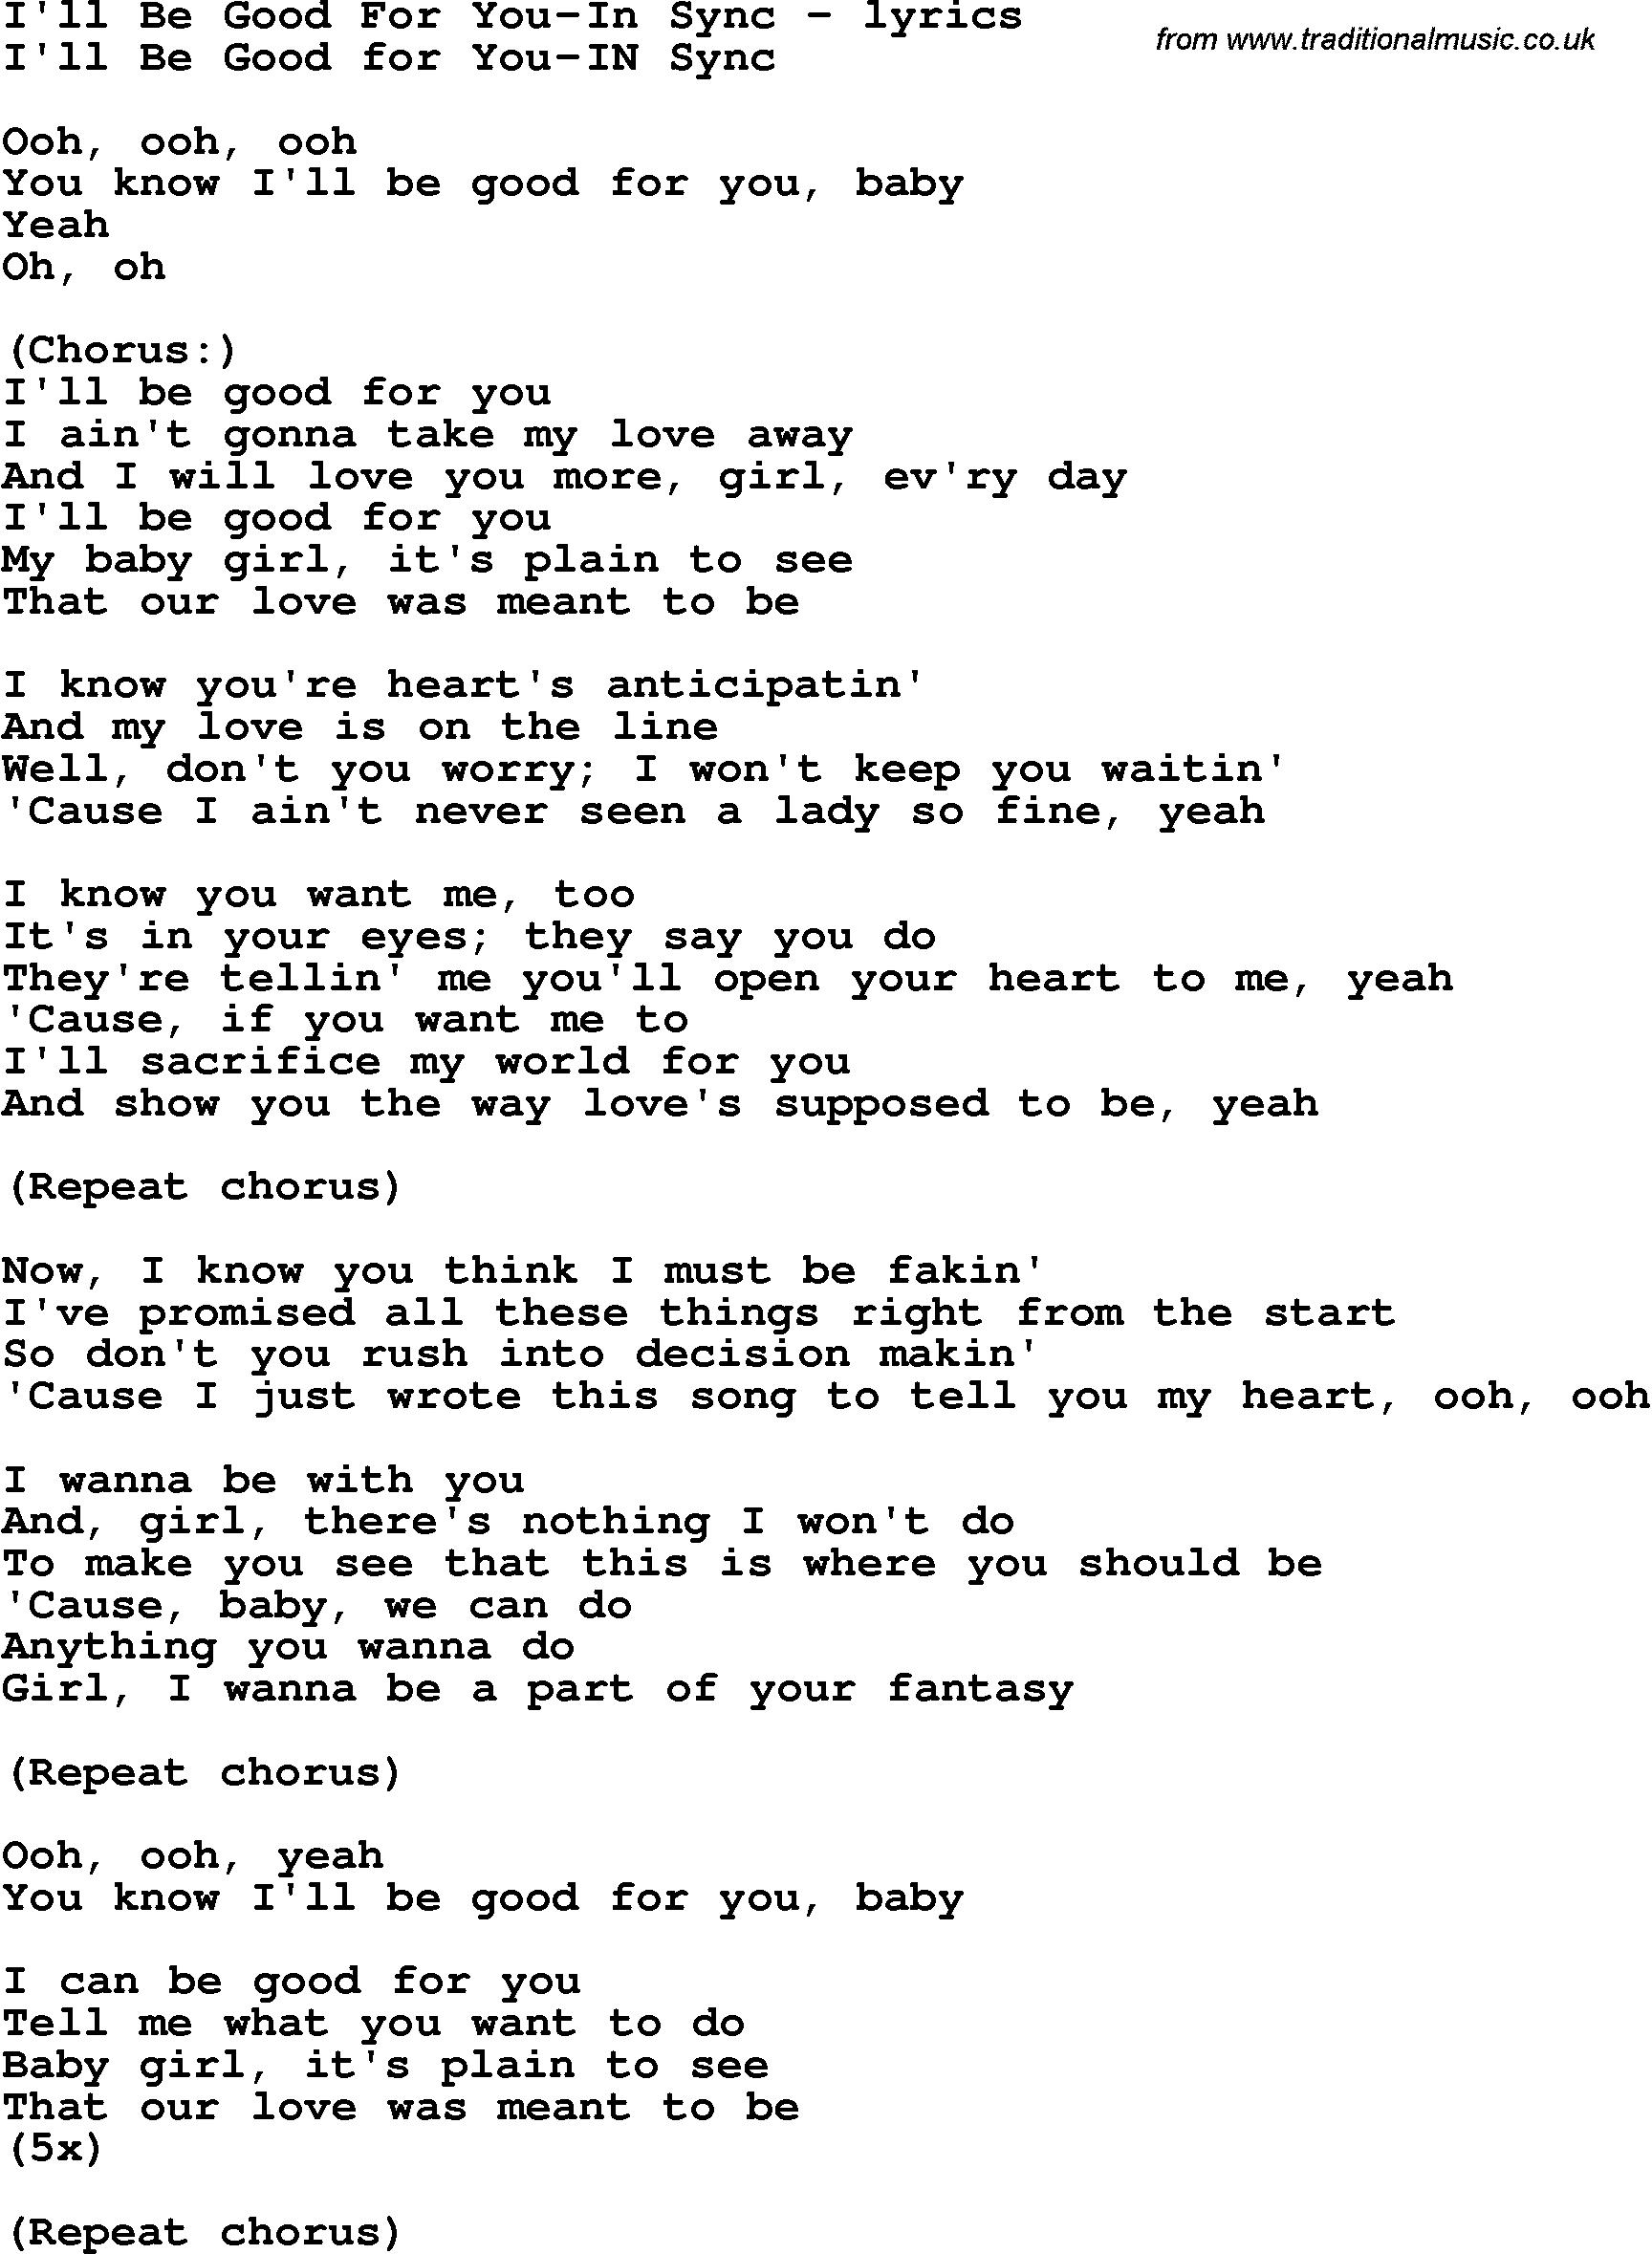 Love Song Lyrics for: I'll Be Good For You-In Sync